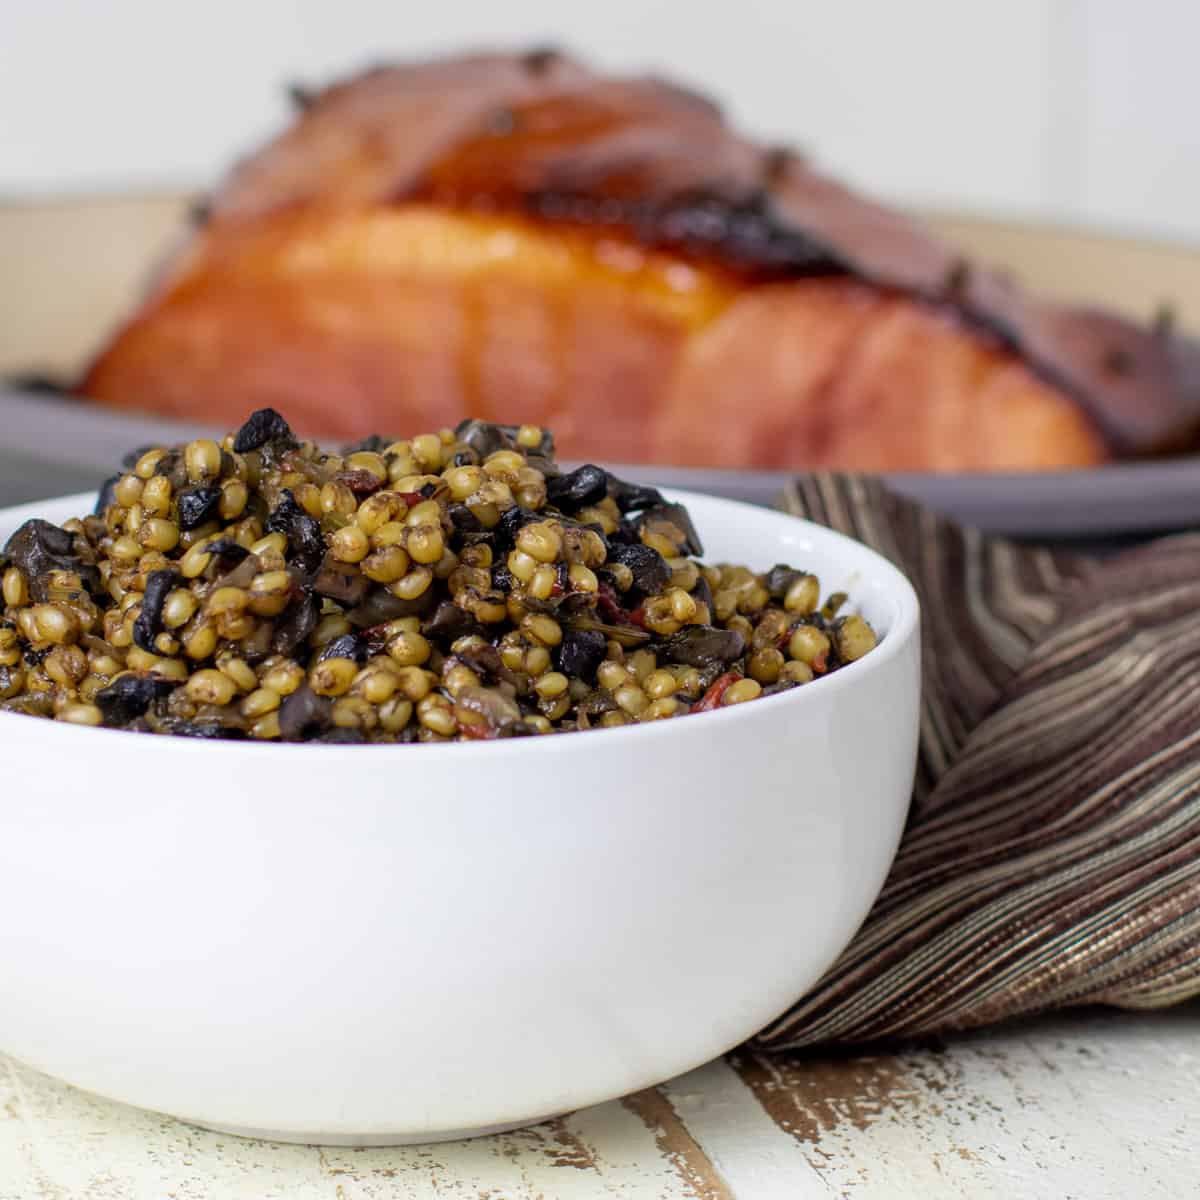 Wheat berries in a white bowl in front of baked ham.